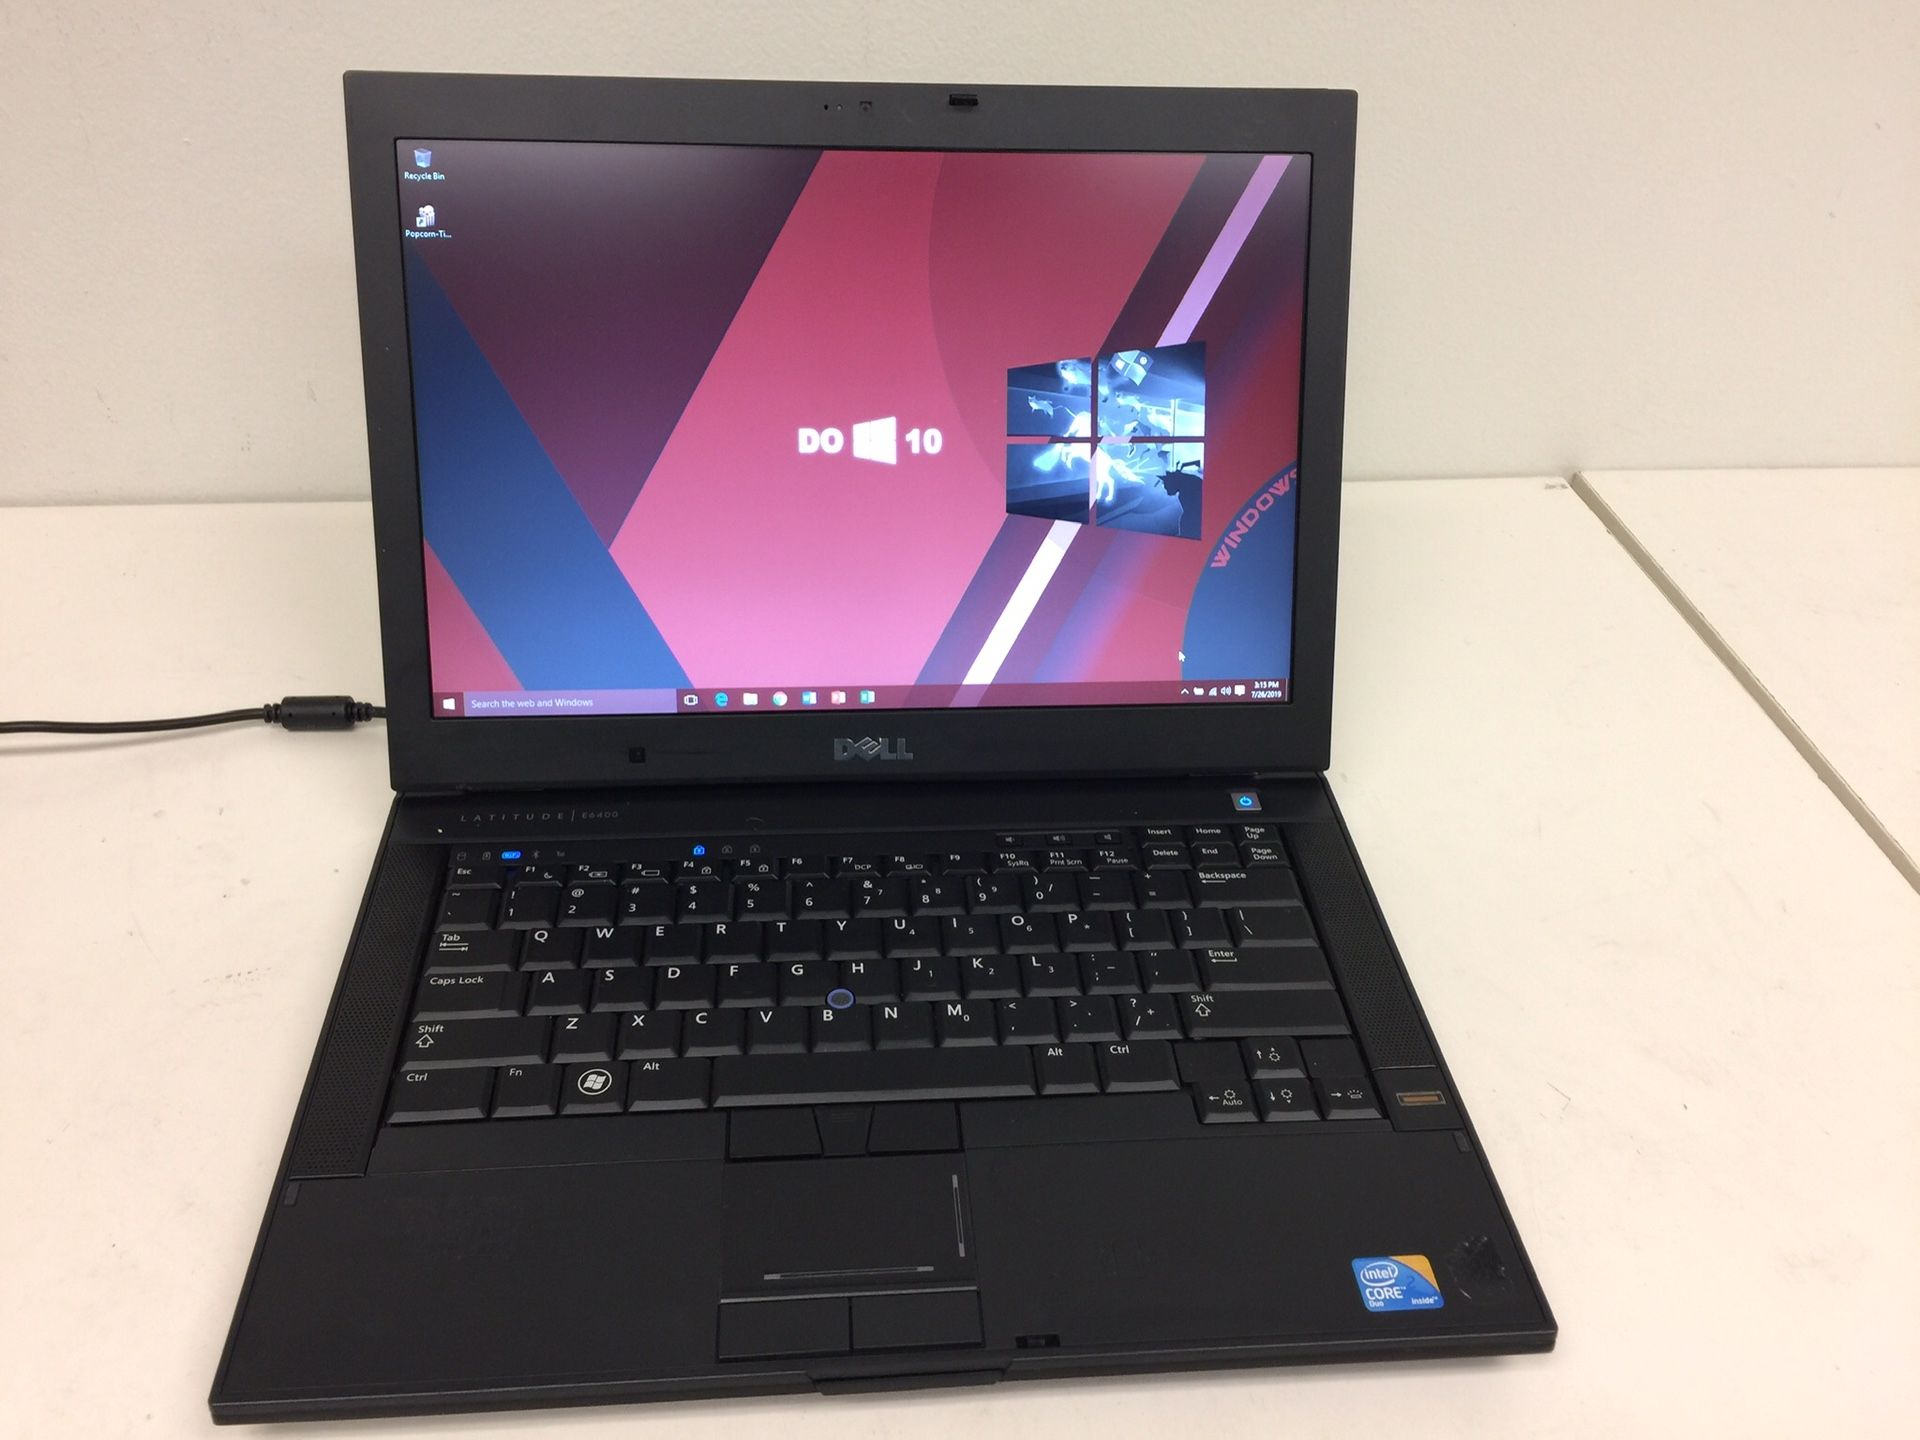 Dell 14” laptop duo core 500gb hd 4gb ram win10 msoffice with watching movie sotware with charger